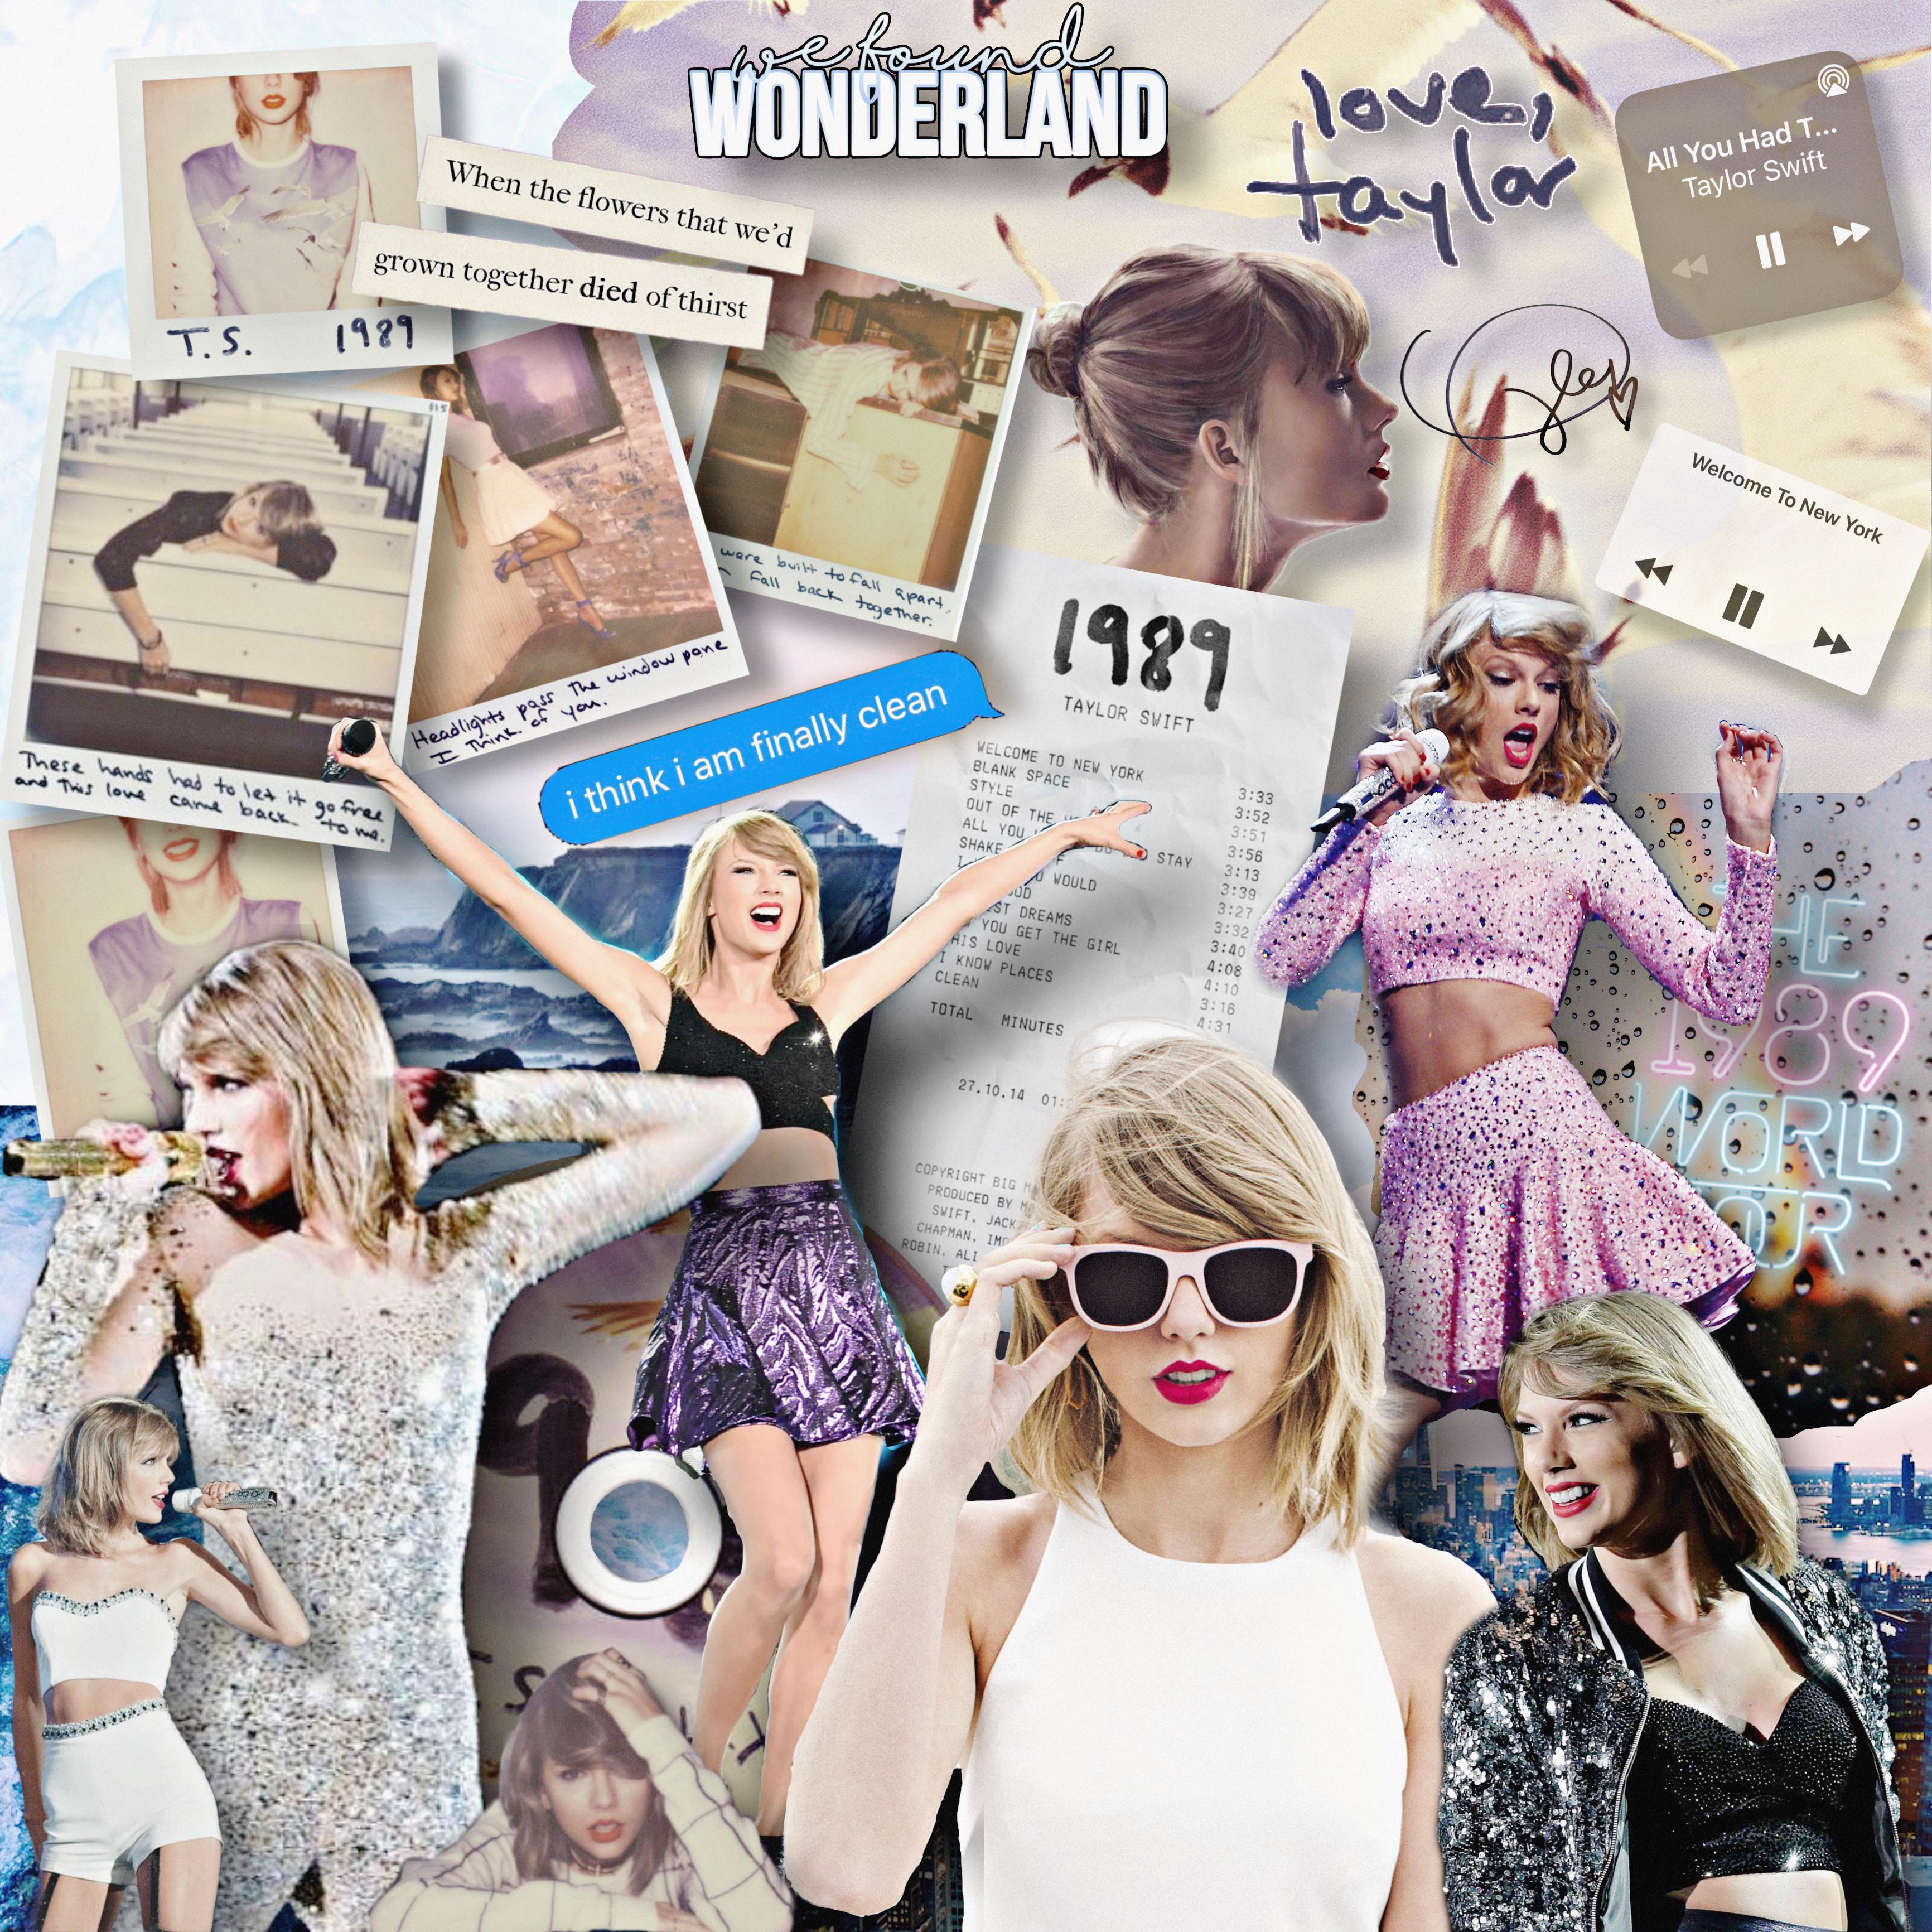 A collage of Taylor Swift images including the cover of her album 1989 - Taylor Swift